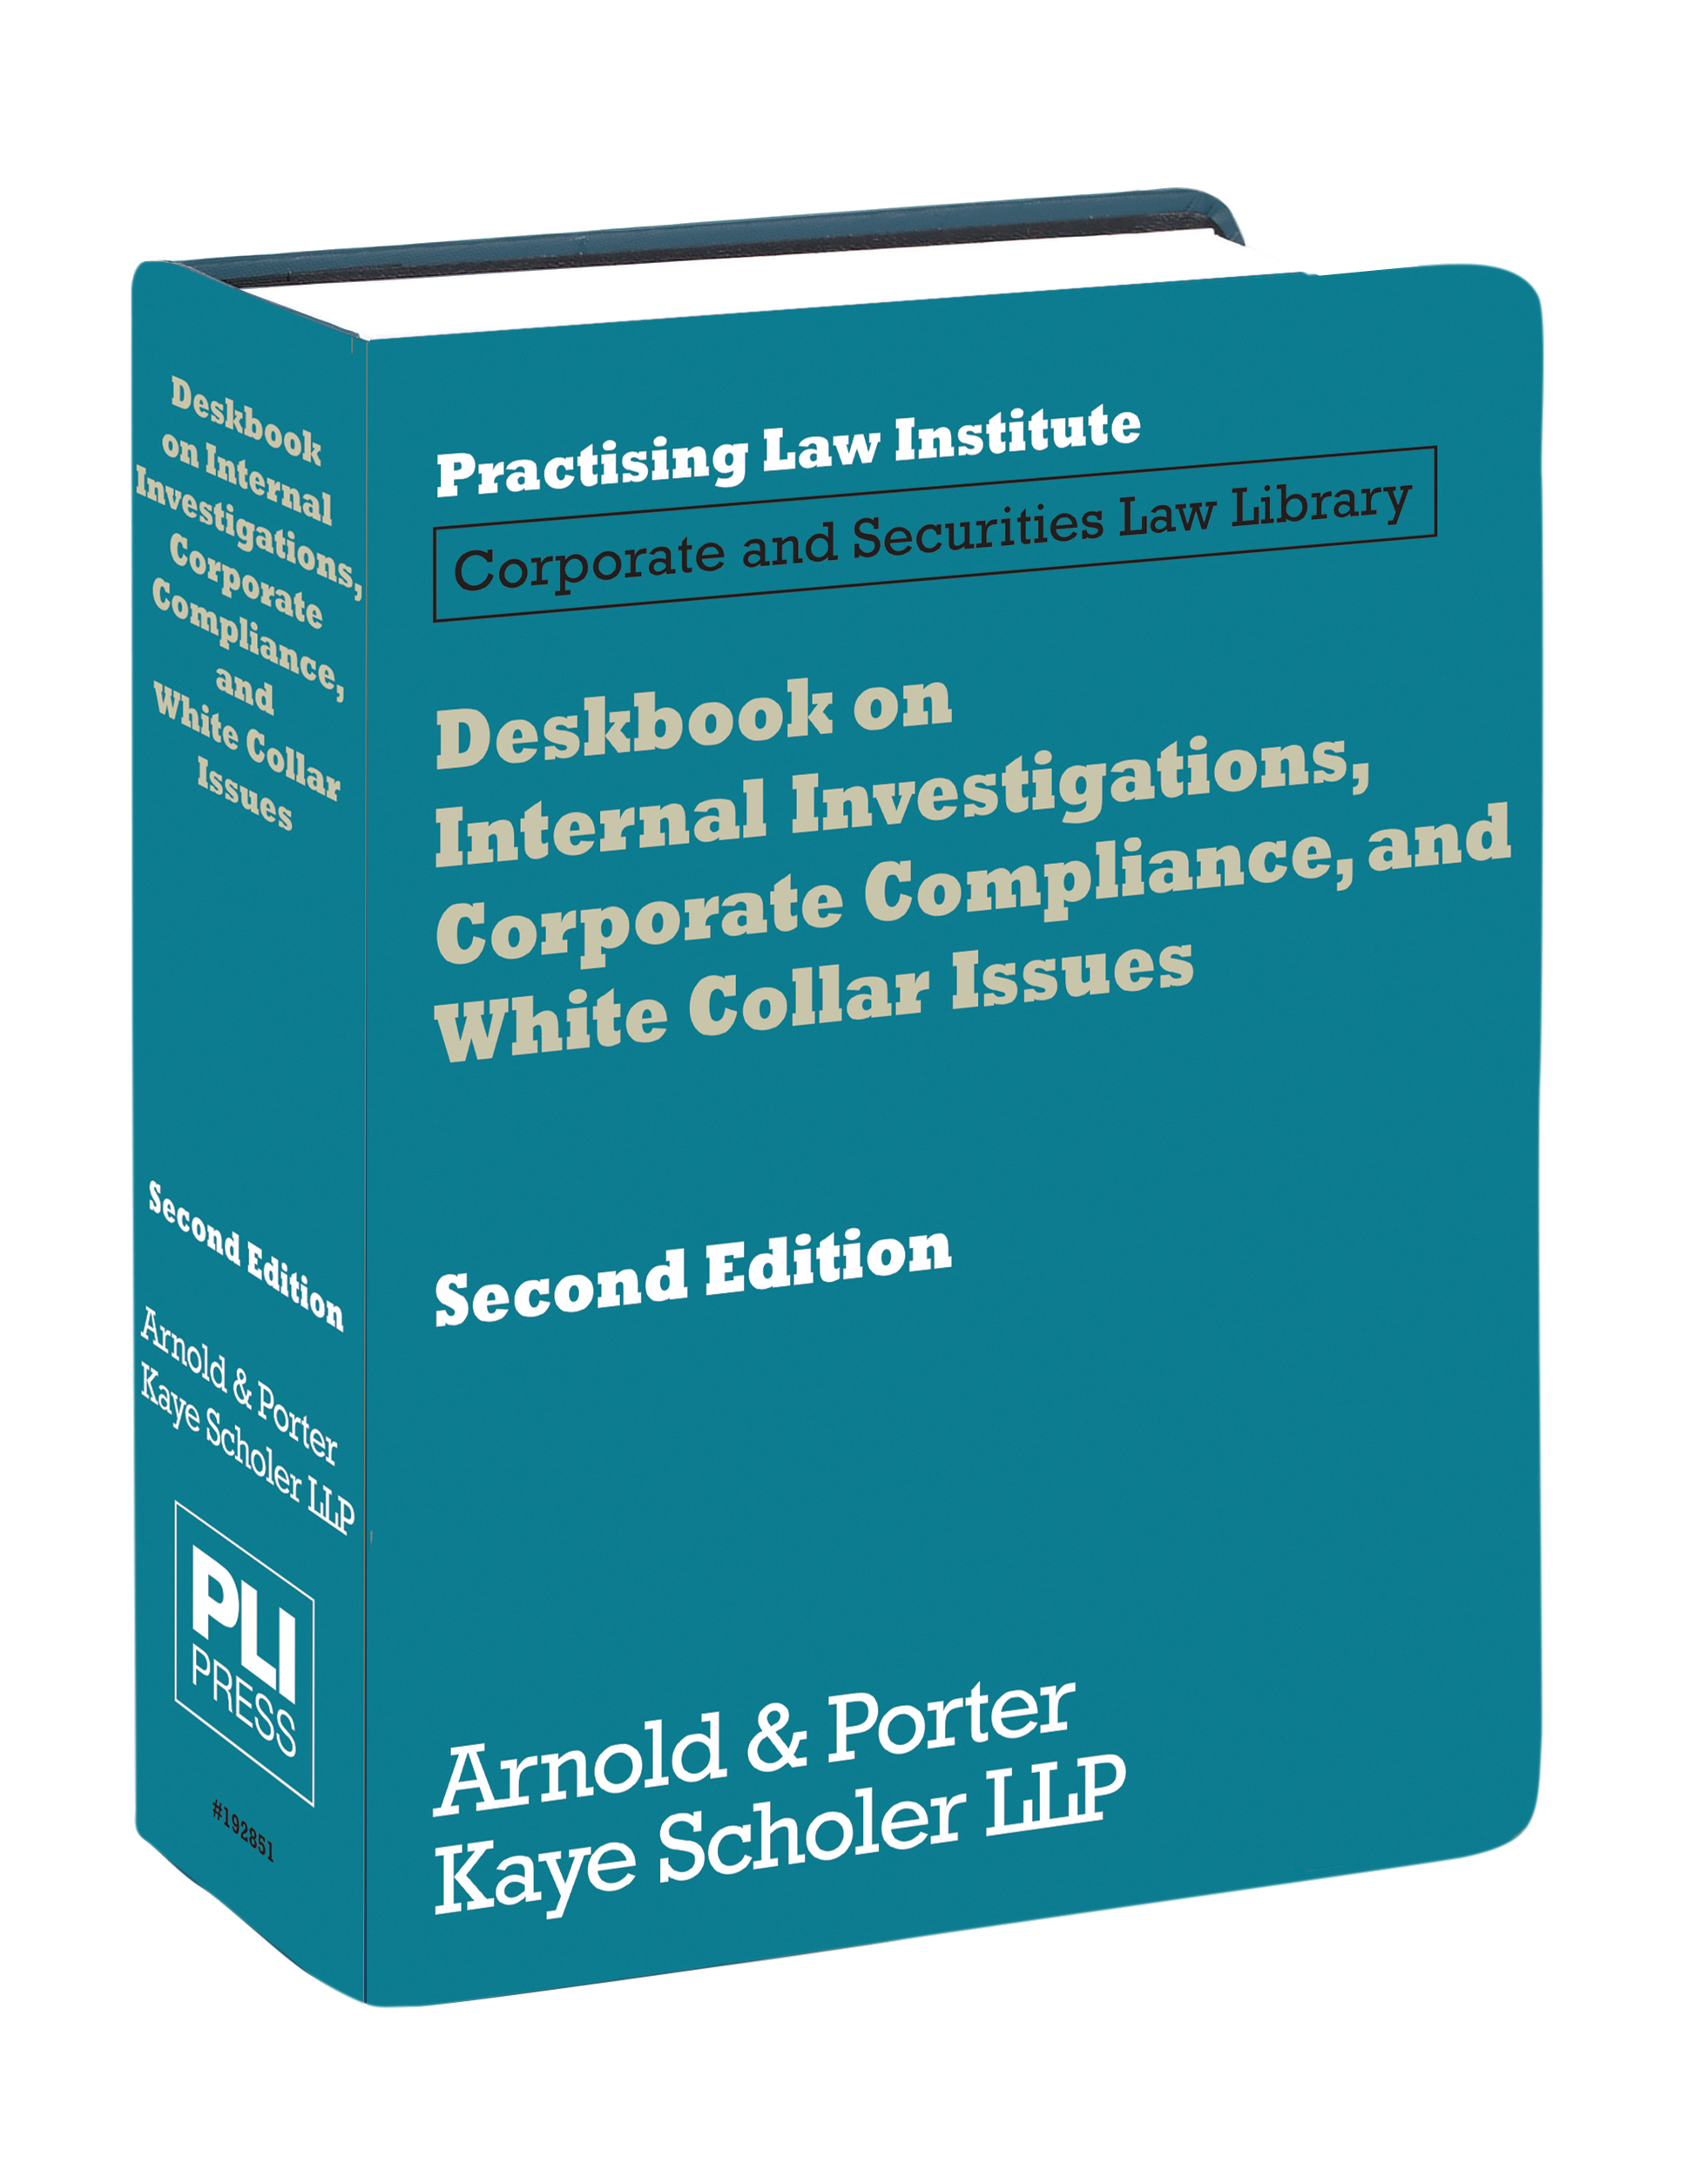 Deskbook on Internal Investigations, Corporate Compliance, and White Collar Issues